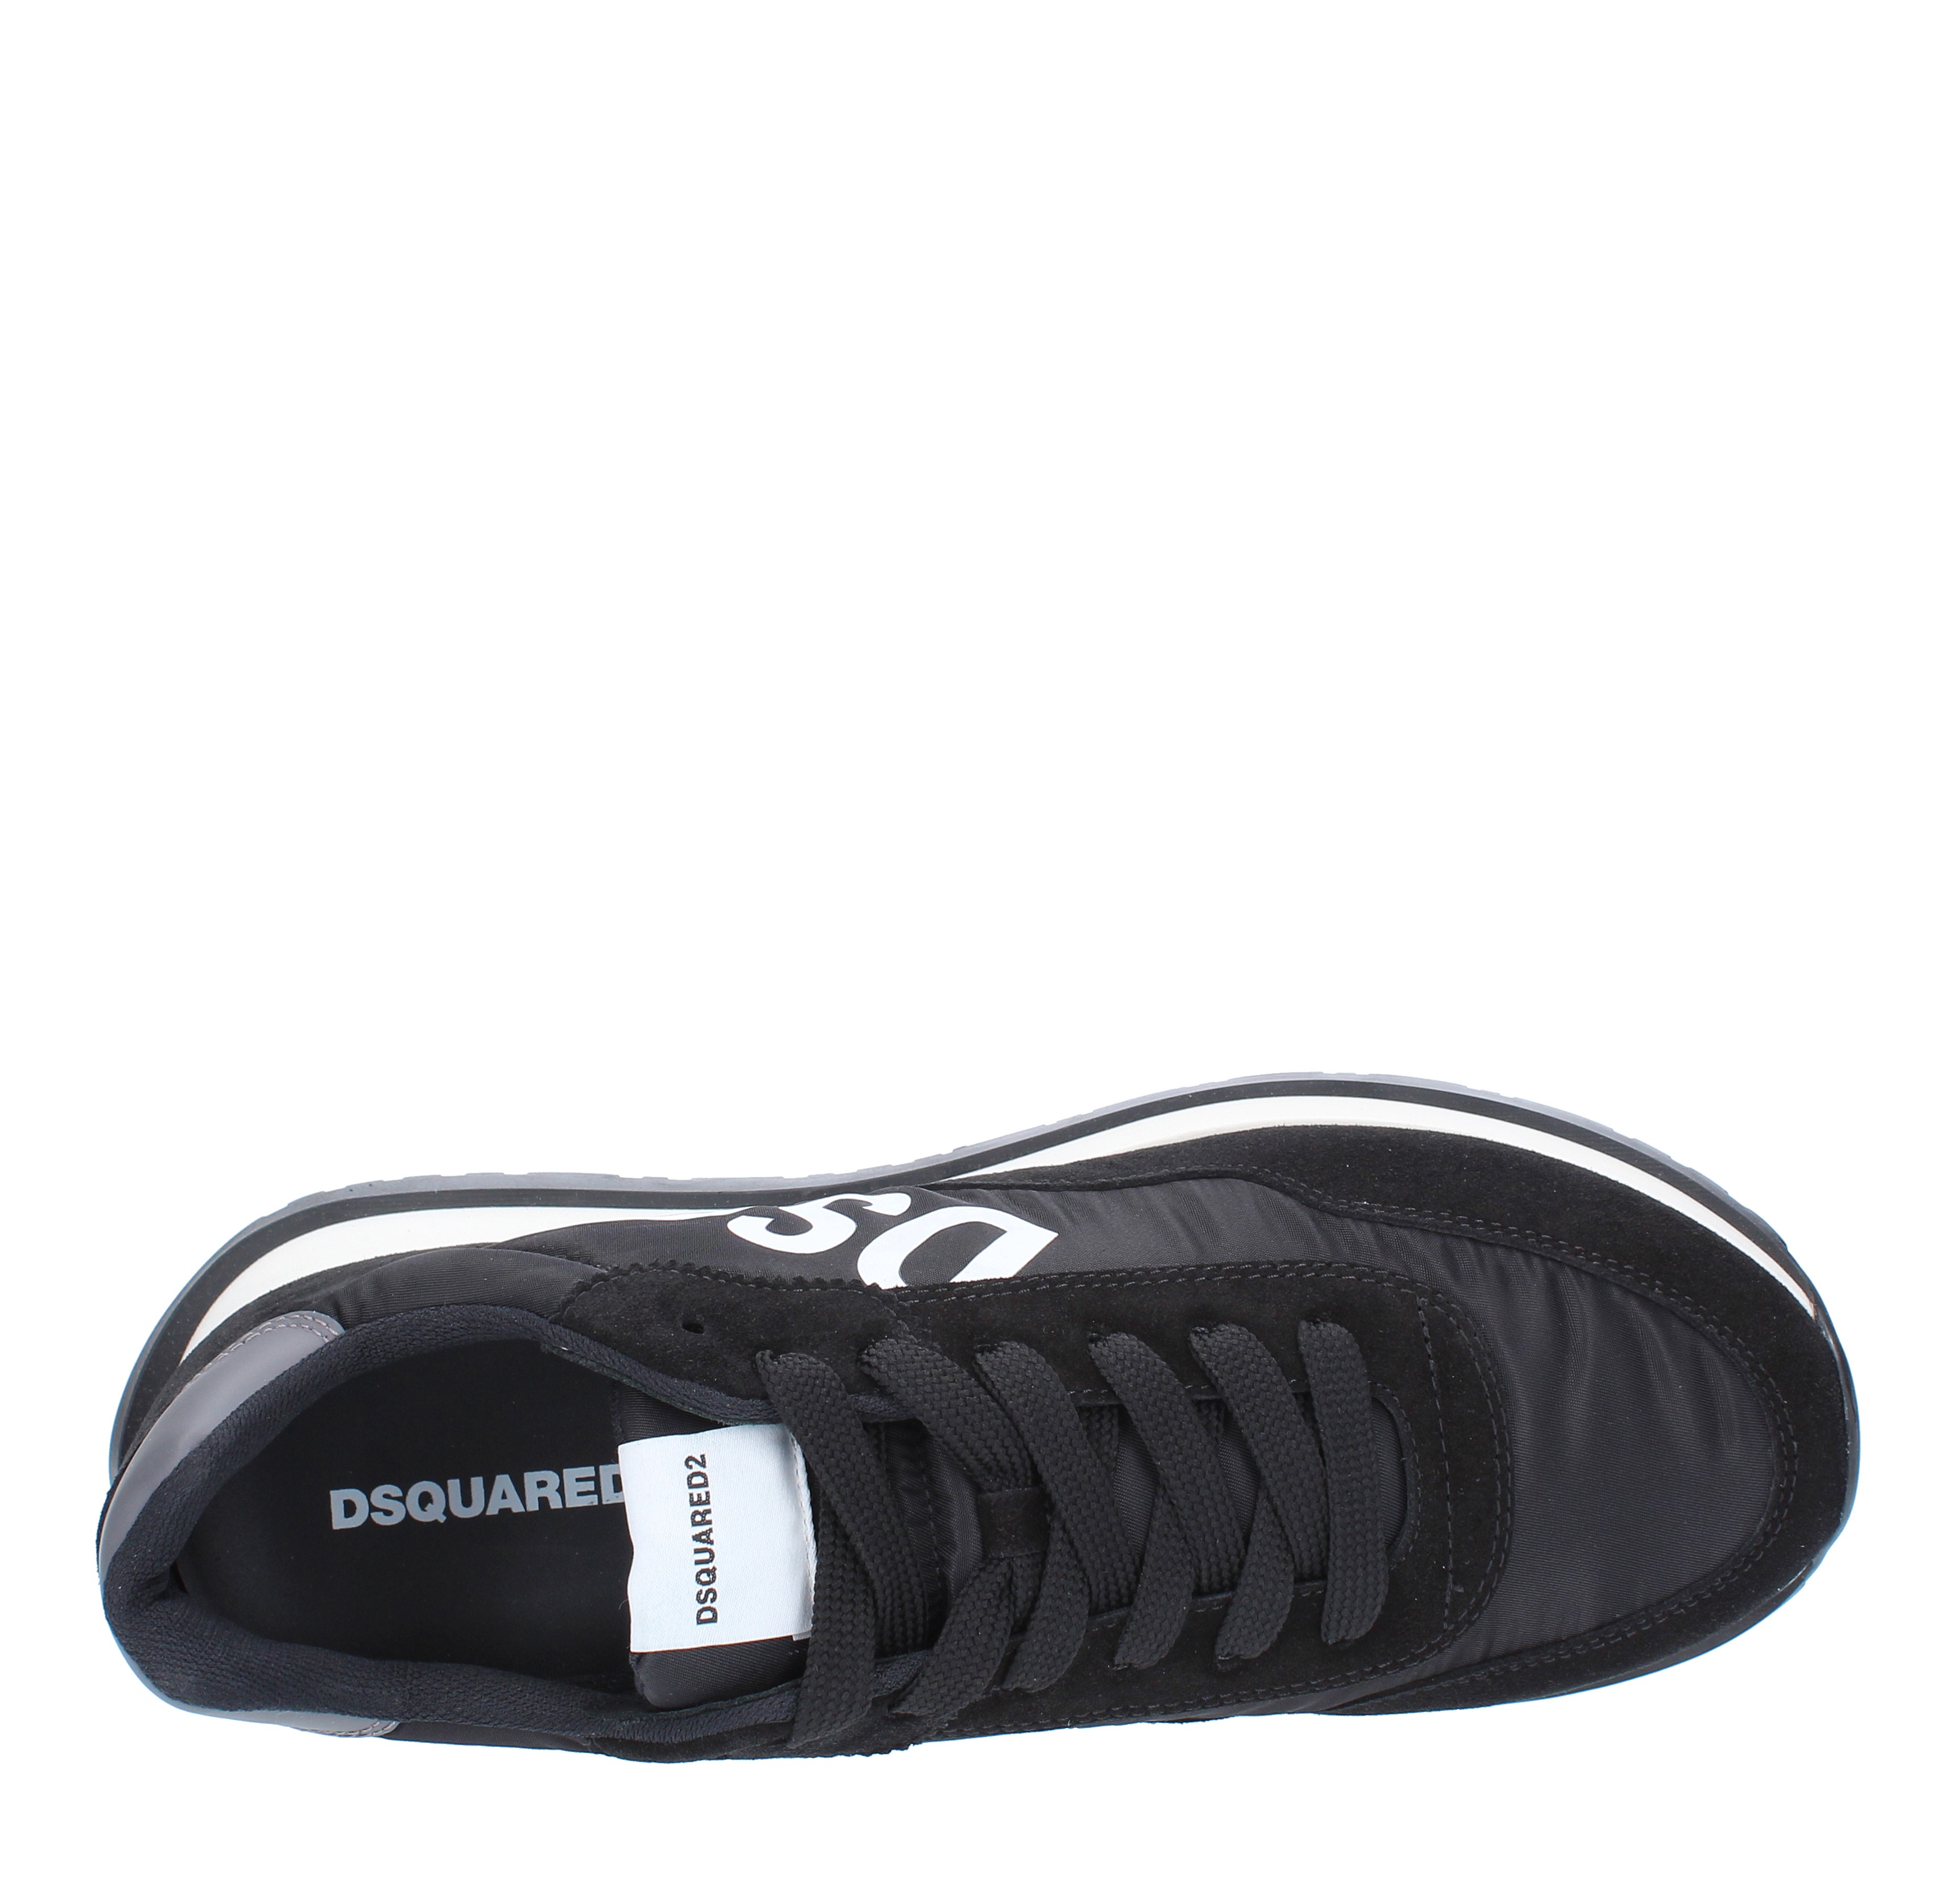 DSQUARED2 RUNNING trainers in suede and fabric - DSQUARED2 - Ginevra  calzature